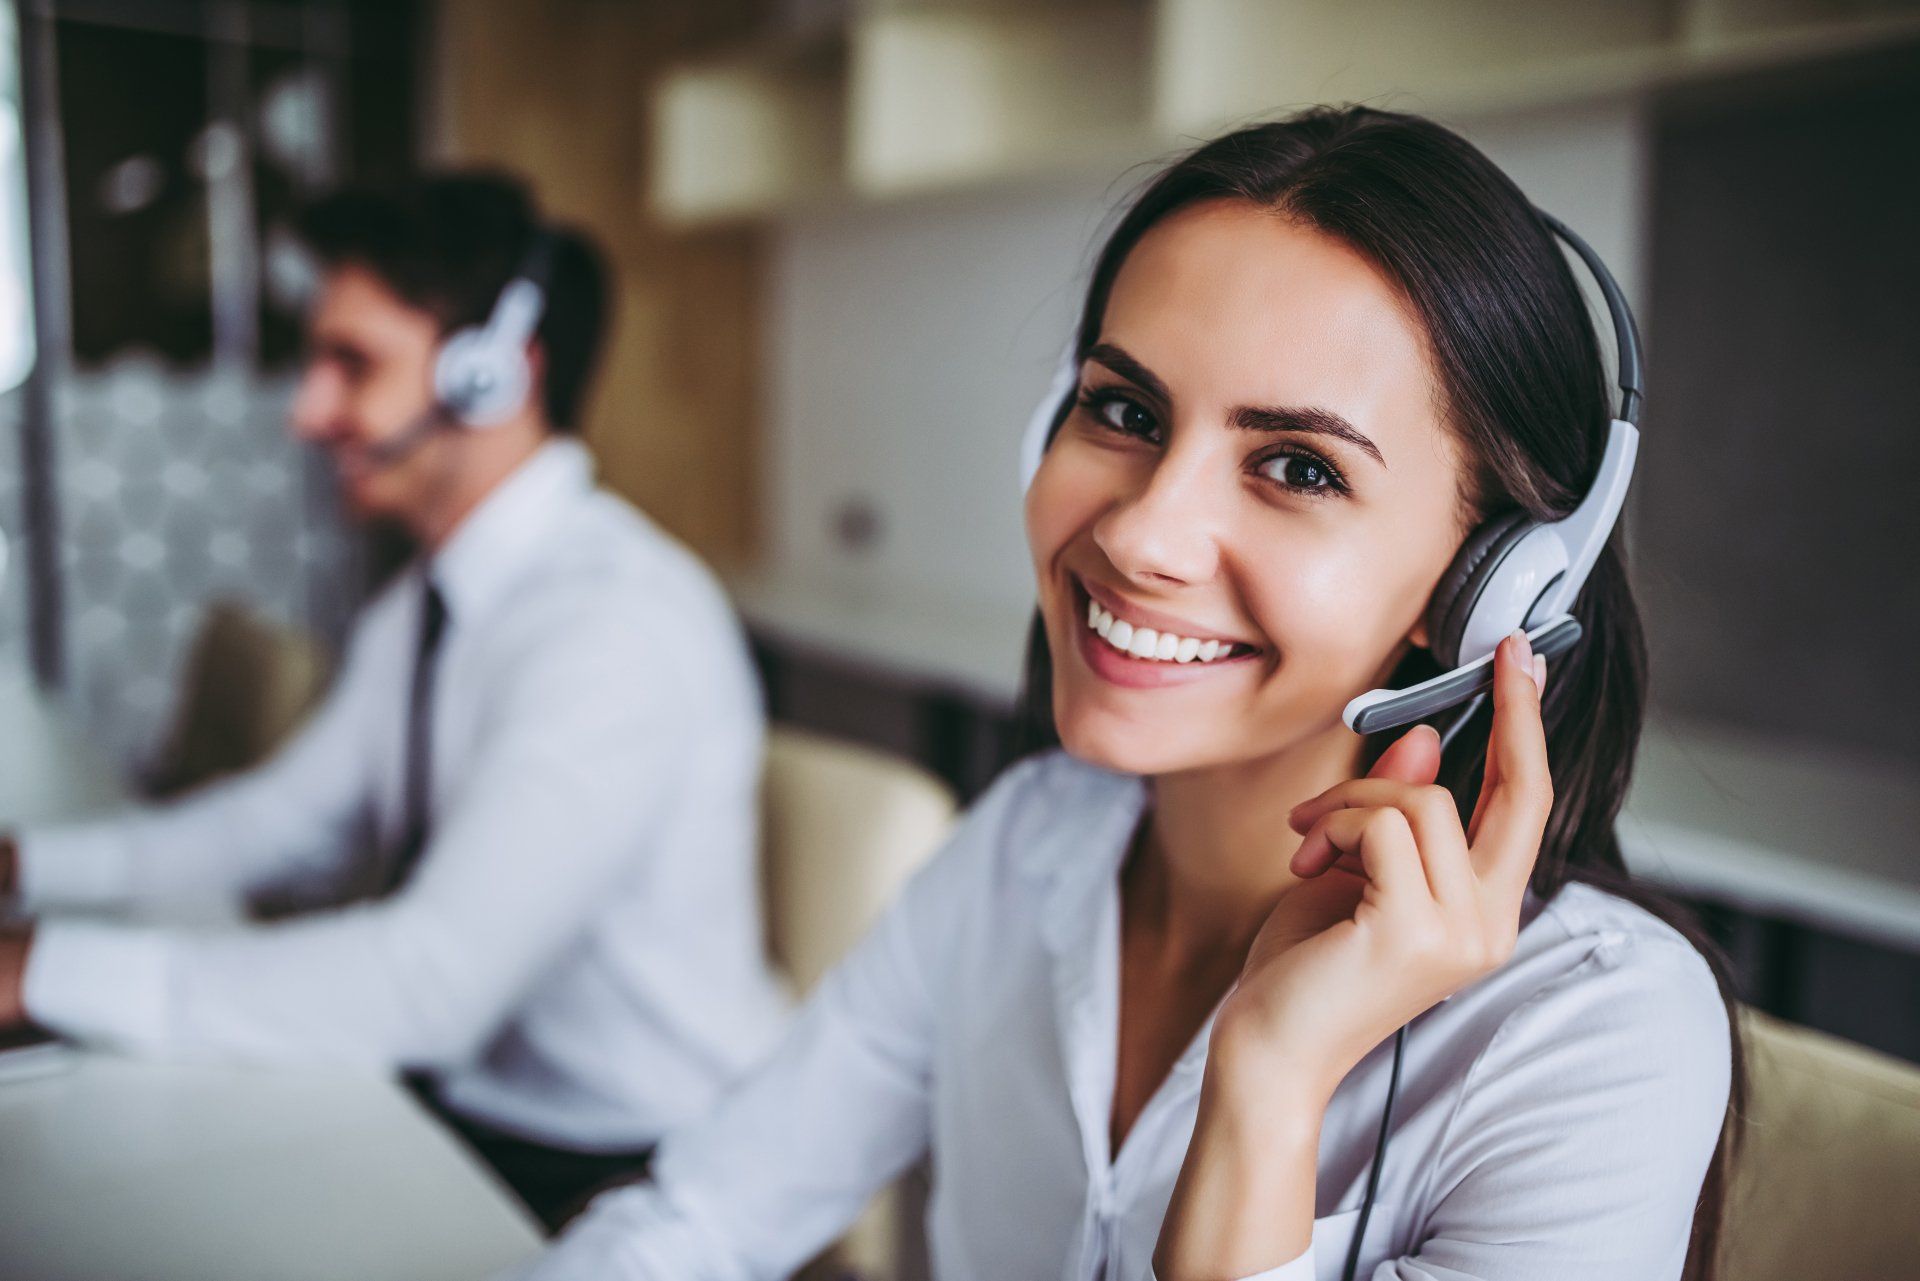 24/7 Answering Service — Call Center Workers in Headphones in Akron, OH